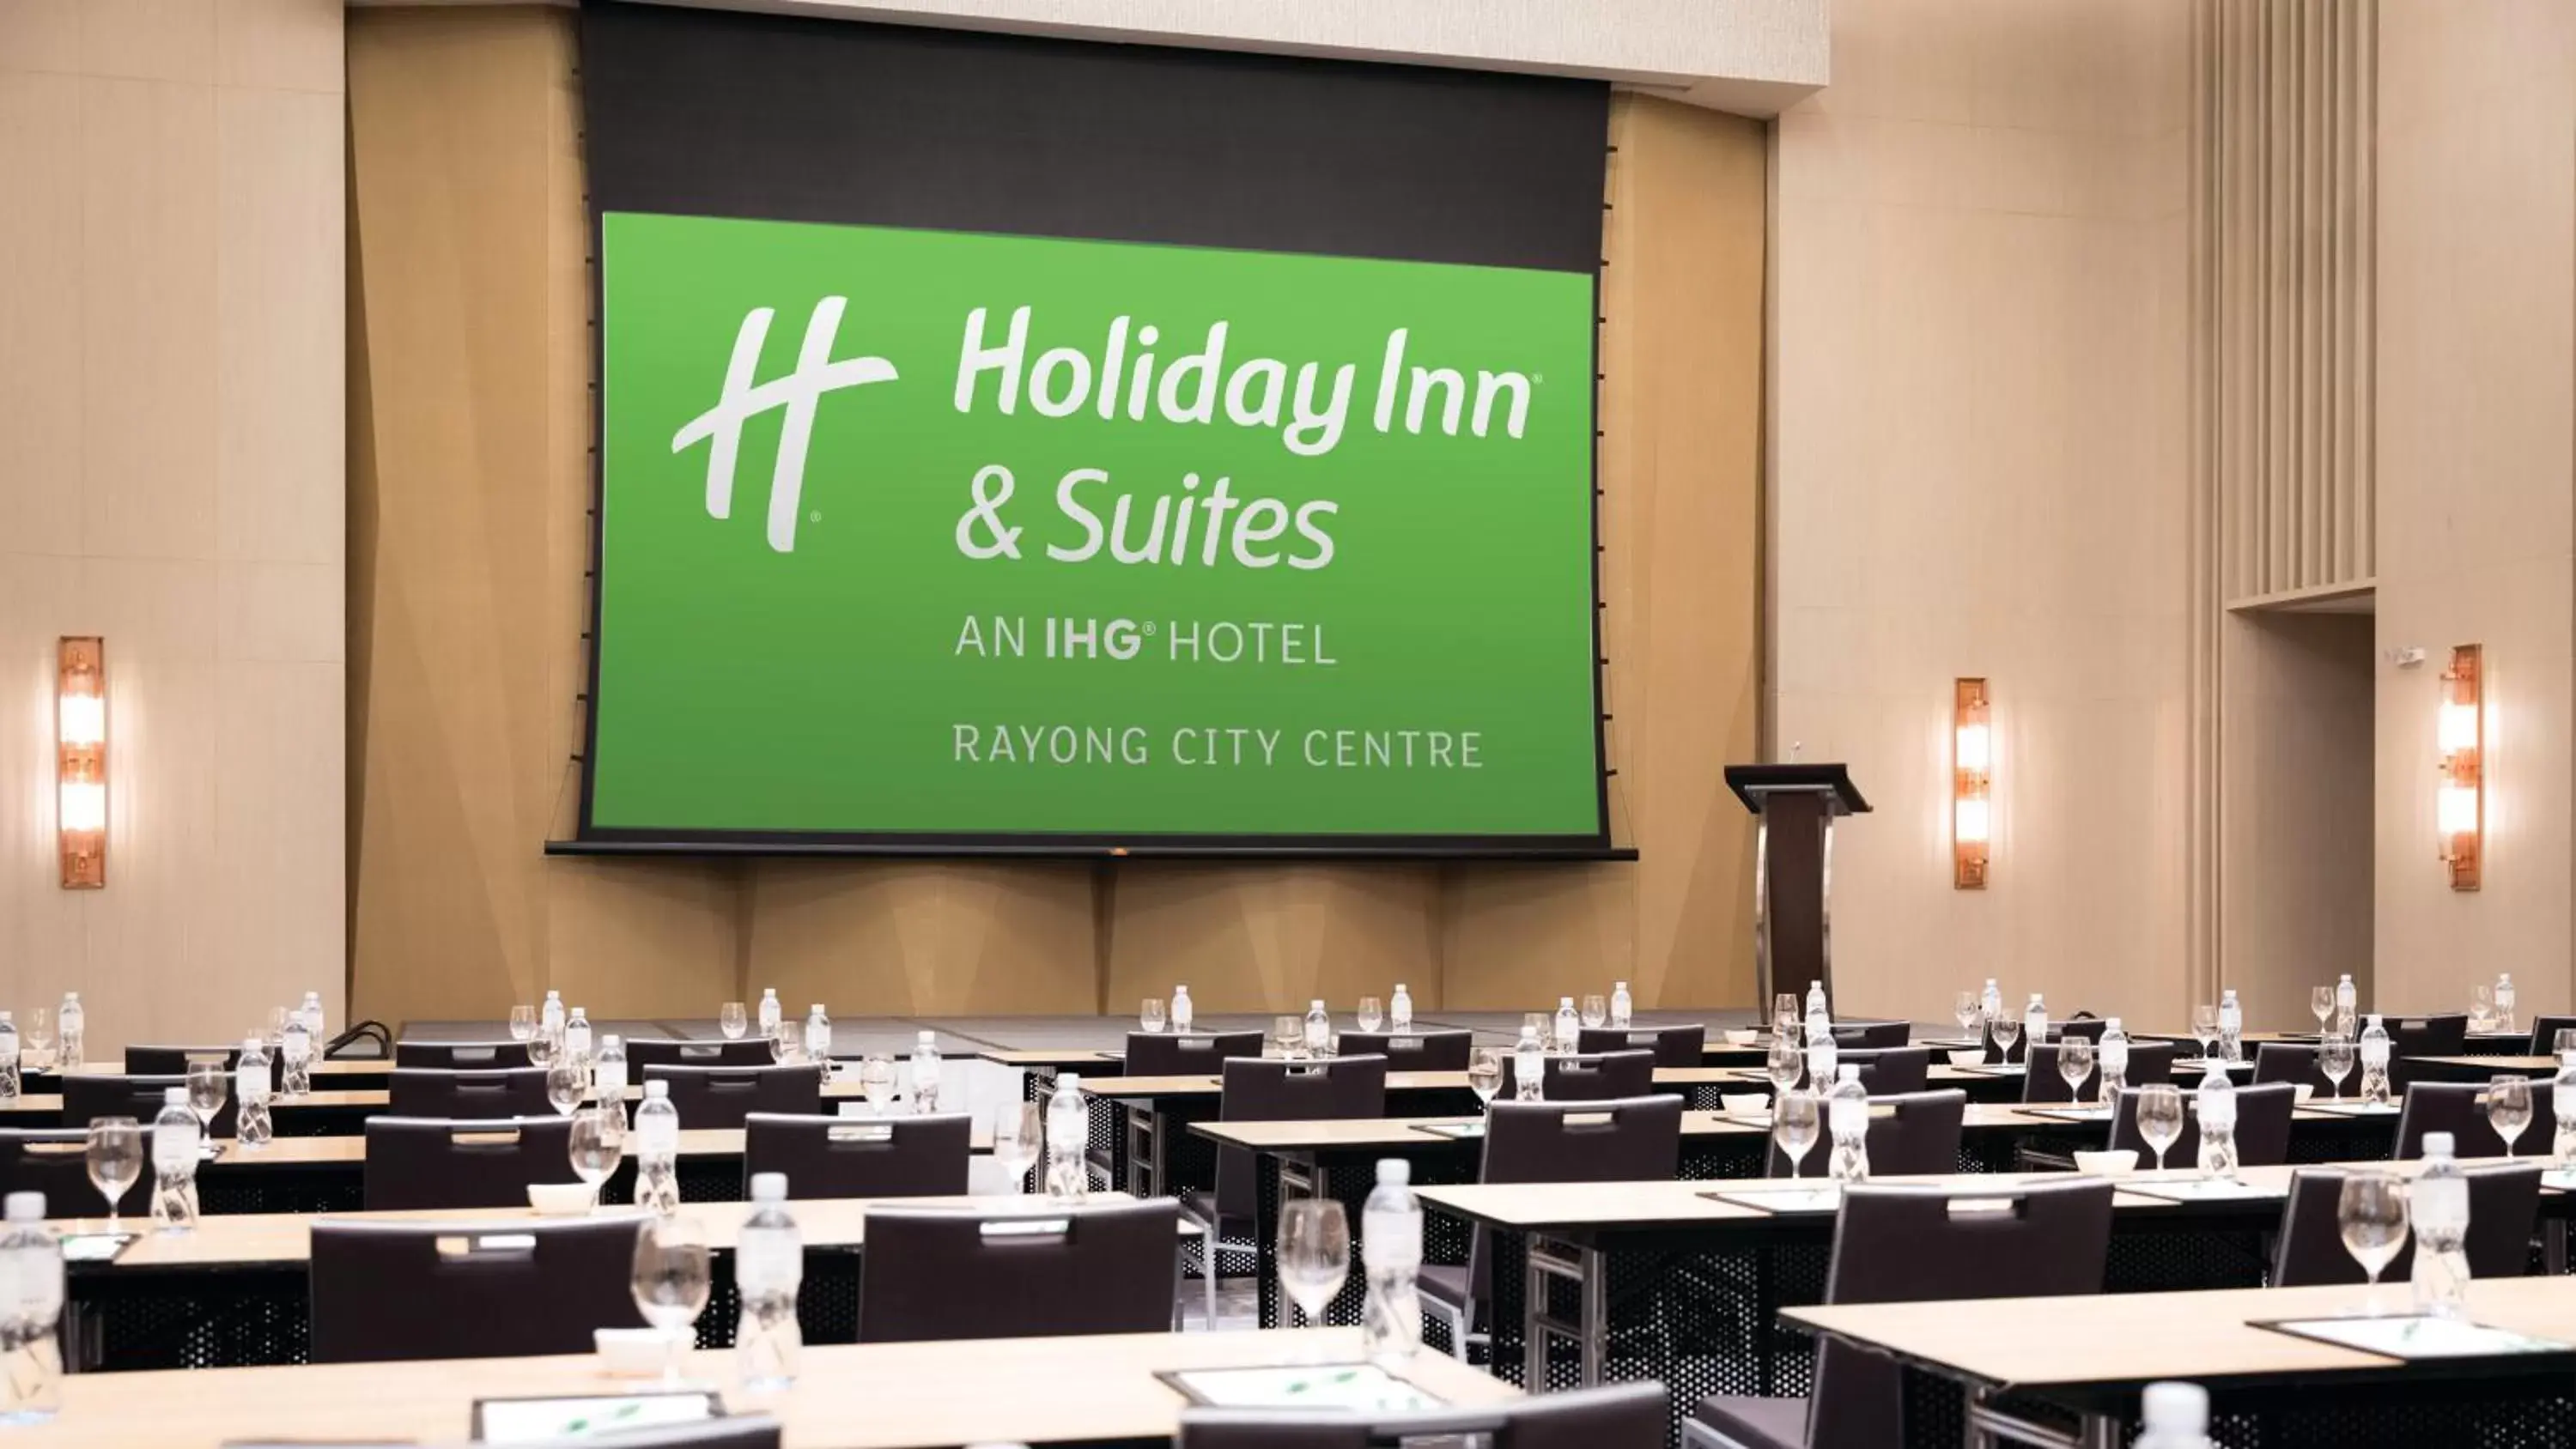 Banquet/Function facilities in Holiday Inn & Suites Rayong City Centre, an IHG Hotel